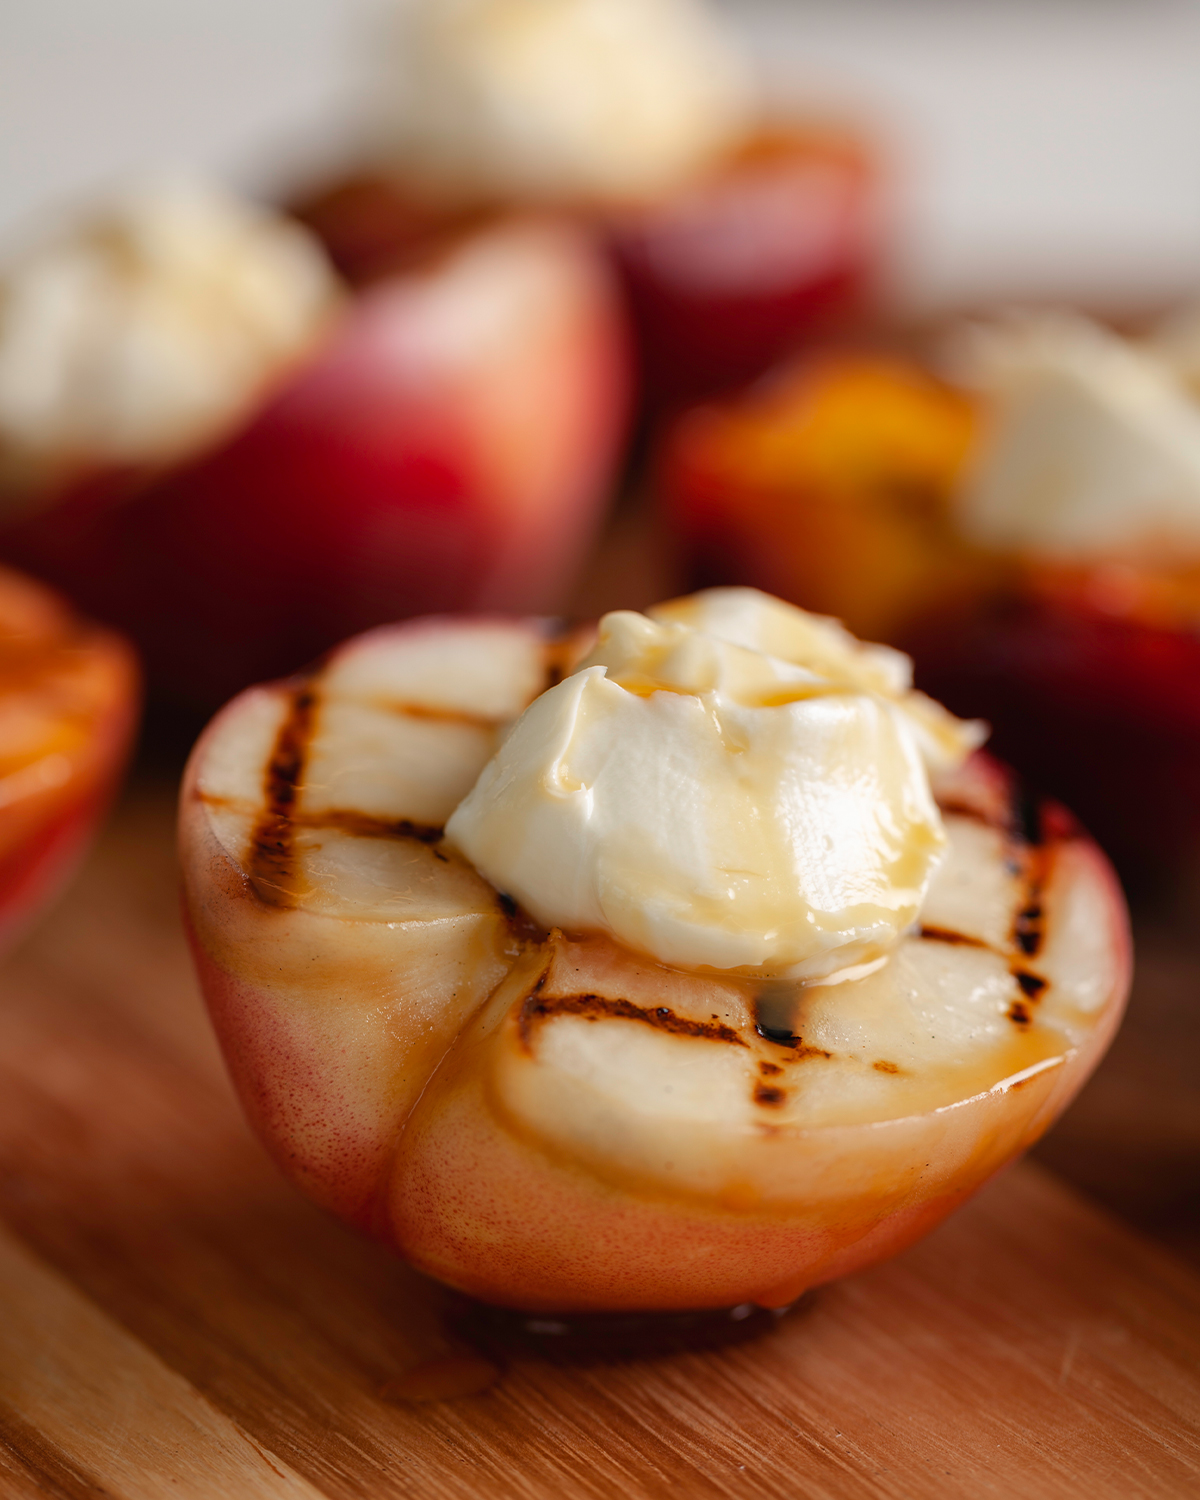 Grilled Peaches with Mascarpone & Caramel Sauce